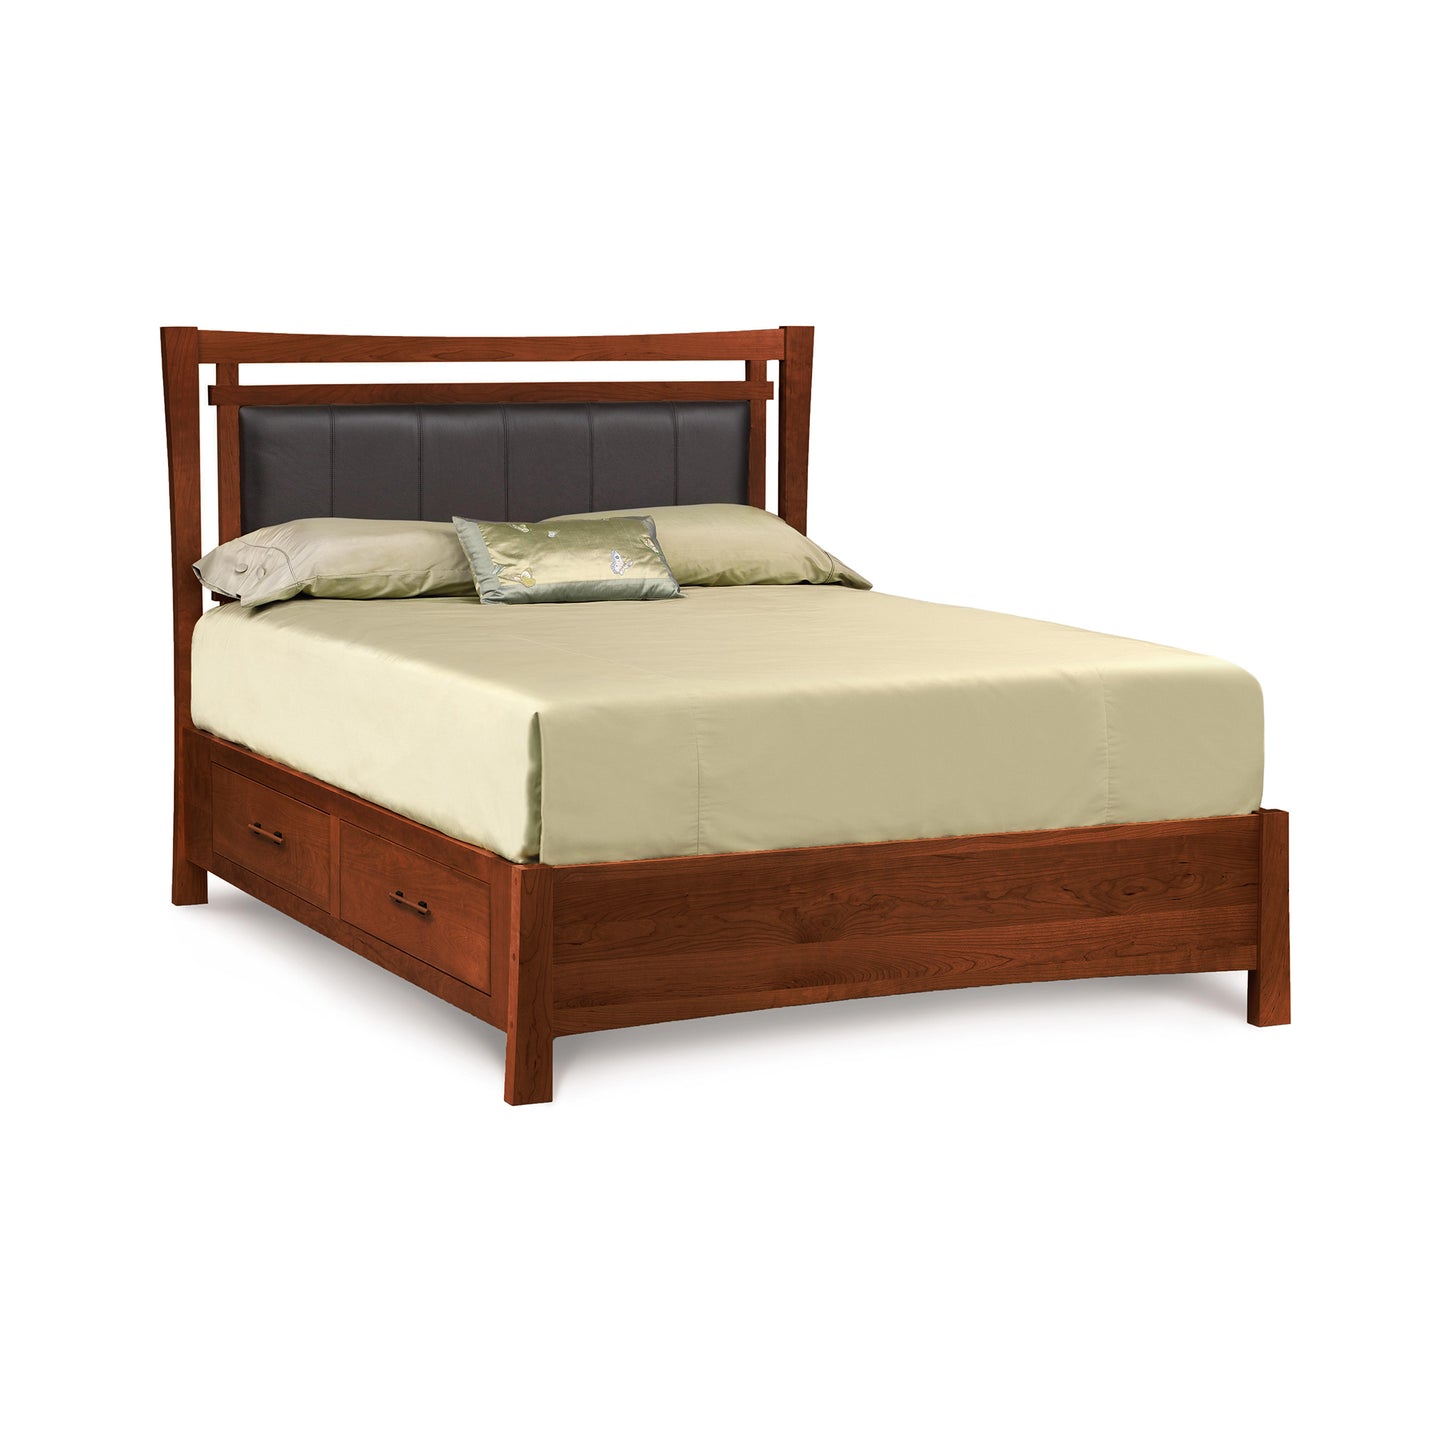 A solid cherry wood queen-size Copeland Furniture Monterey Storage Bed with Upholstered Headboard, dressed with pale yellow bedding and a few decorative pillows, featuring two drawers at the foot of the bed for storage.